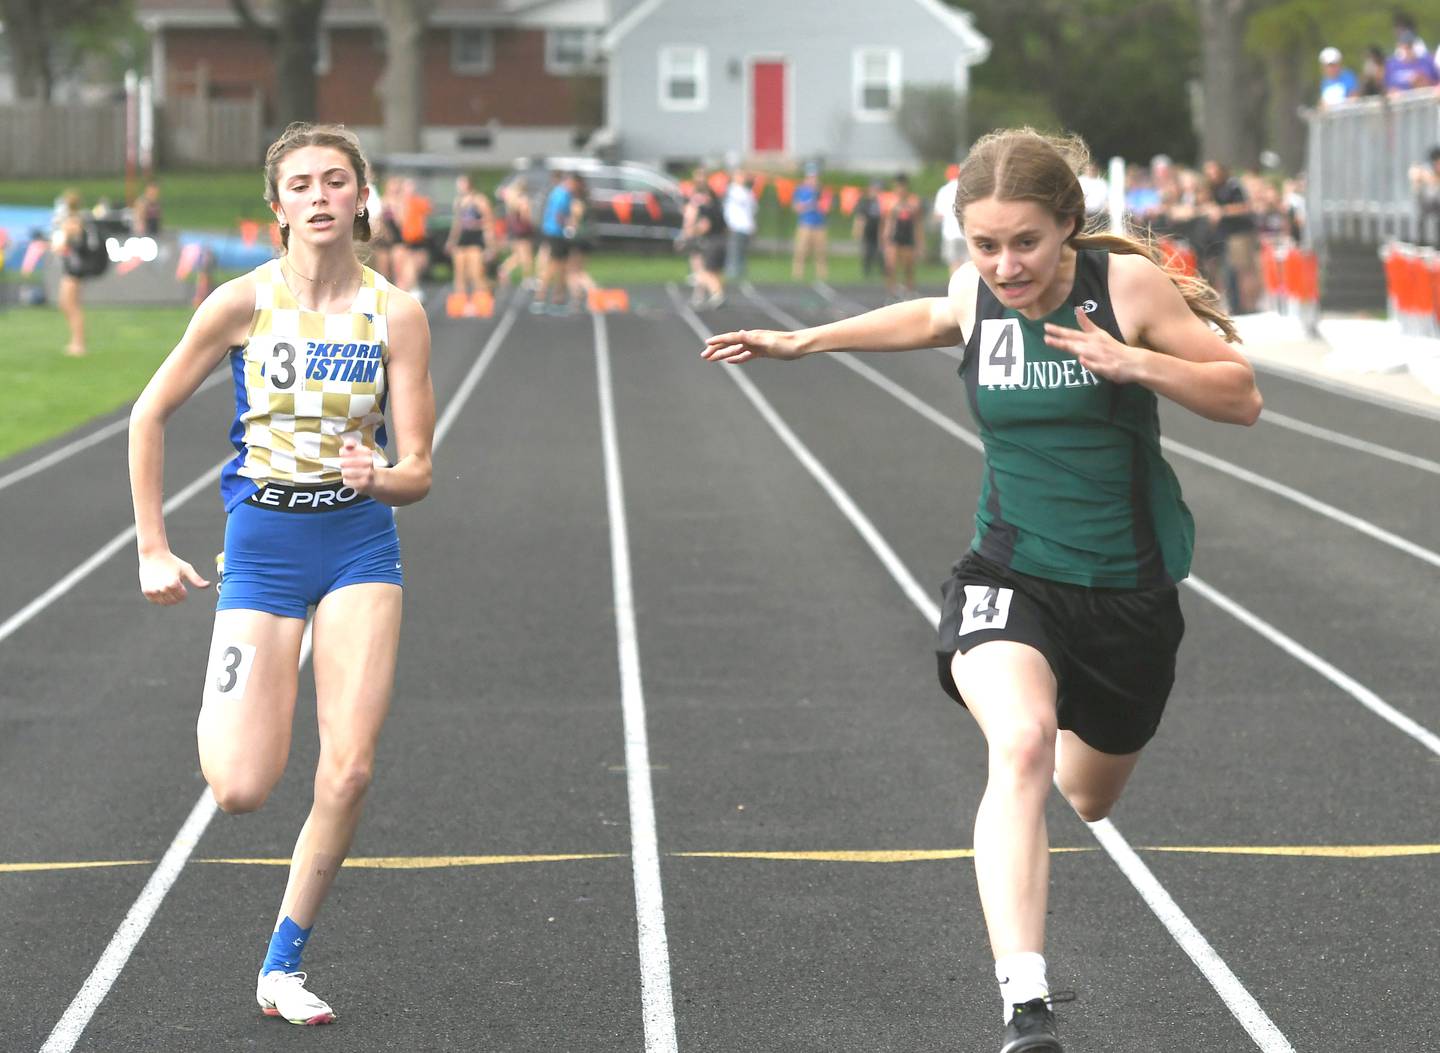 West Carrolll's Emma Randecker (right) crosses the finish line first in the 100 meters at the 1A Winnebago Regional on Friday, May 13. Randecker, a freshman, won the race in 12.73 seconds and will race at the girls state track finals at Eastern Illinois University in Charleston this week.